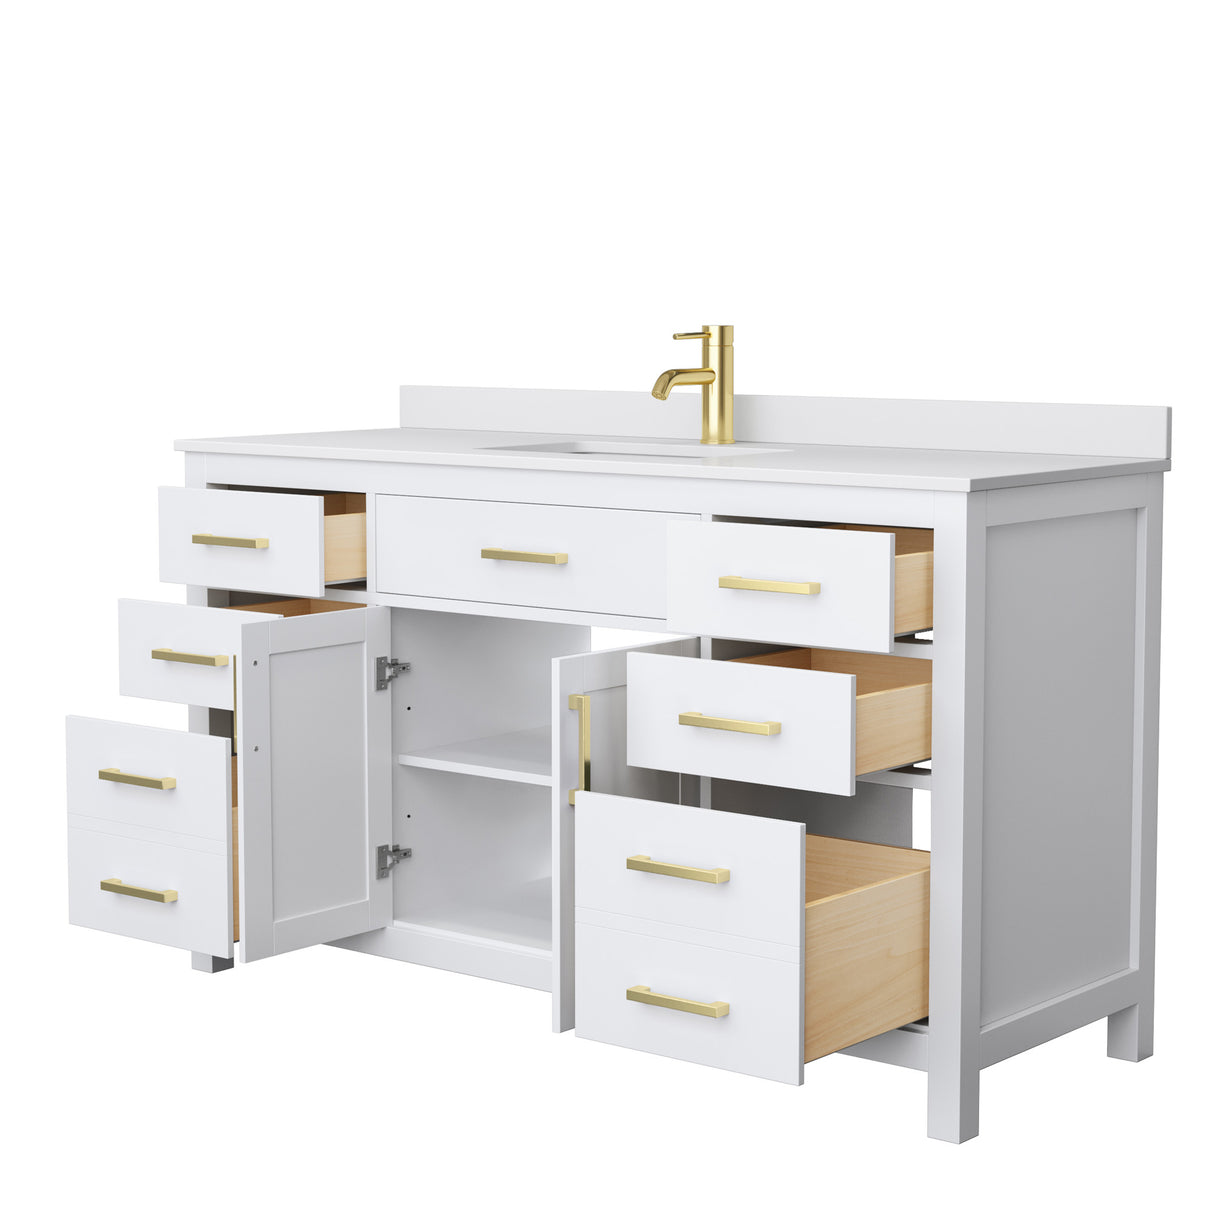 Beckett 60 Inch Single Bathroom Vanity in White White Cultured Marble Countertop Undermount Square Sink Brushed Gold Trim